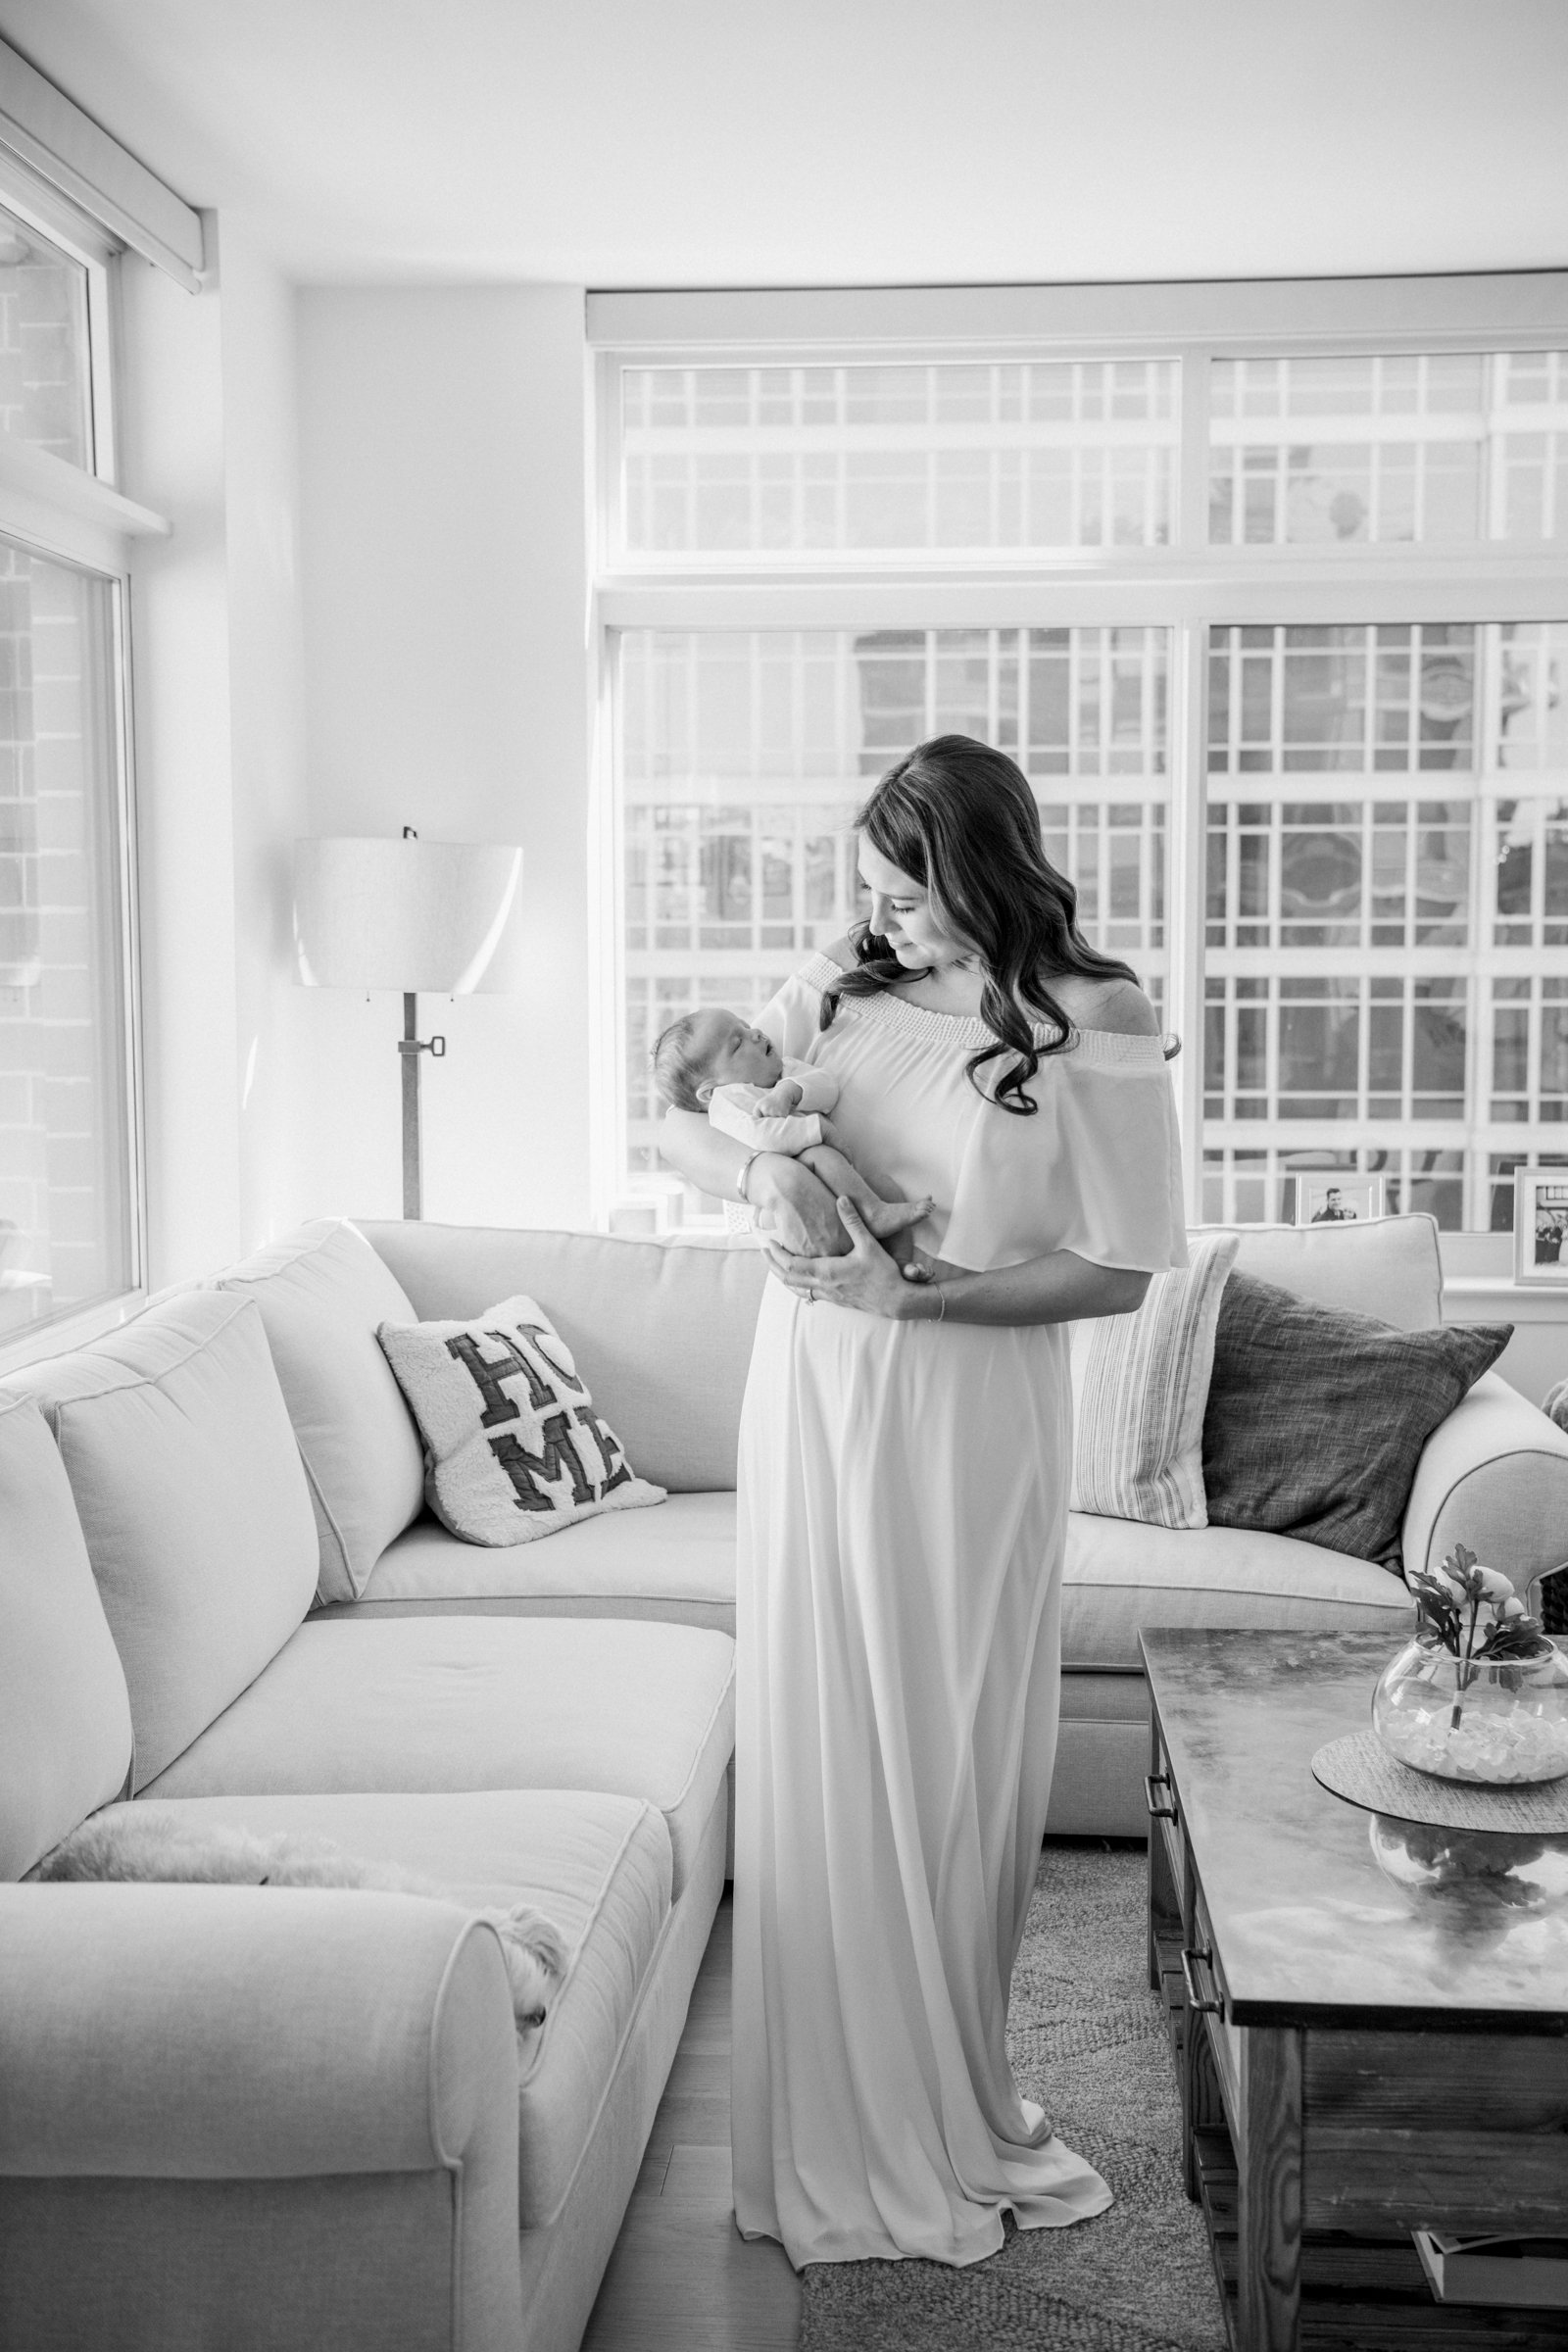  Black and white portrait of a mother's love holding her brand new baby in her living room captured in New Jersey by Nicole Hawkins Photography. brand new baby first baby motherhood captured in a portrait #nicolehawkinsphotography #nicolehawkinsnewbo